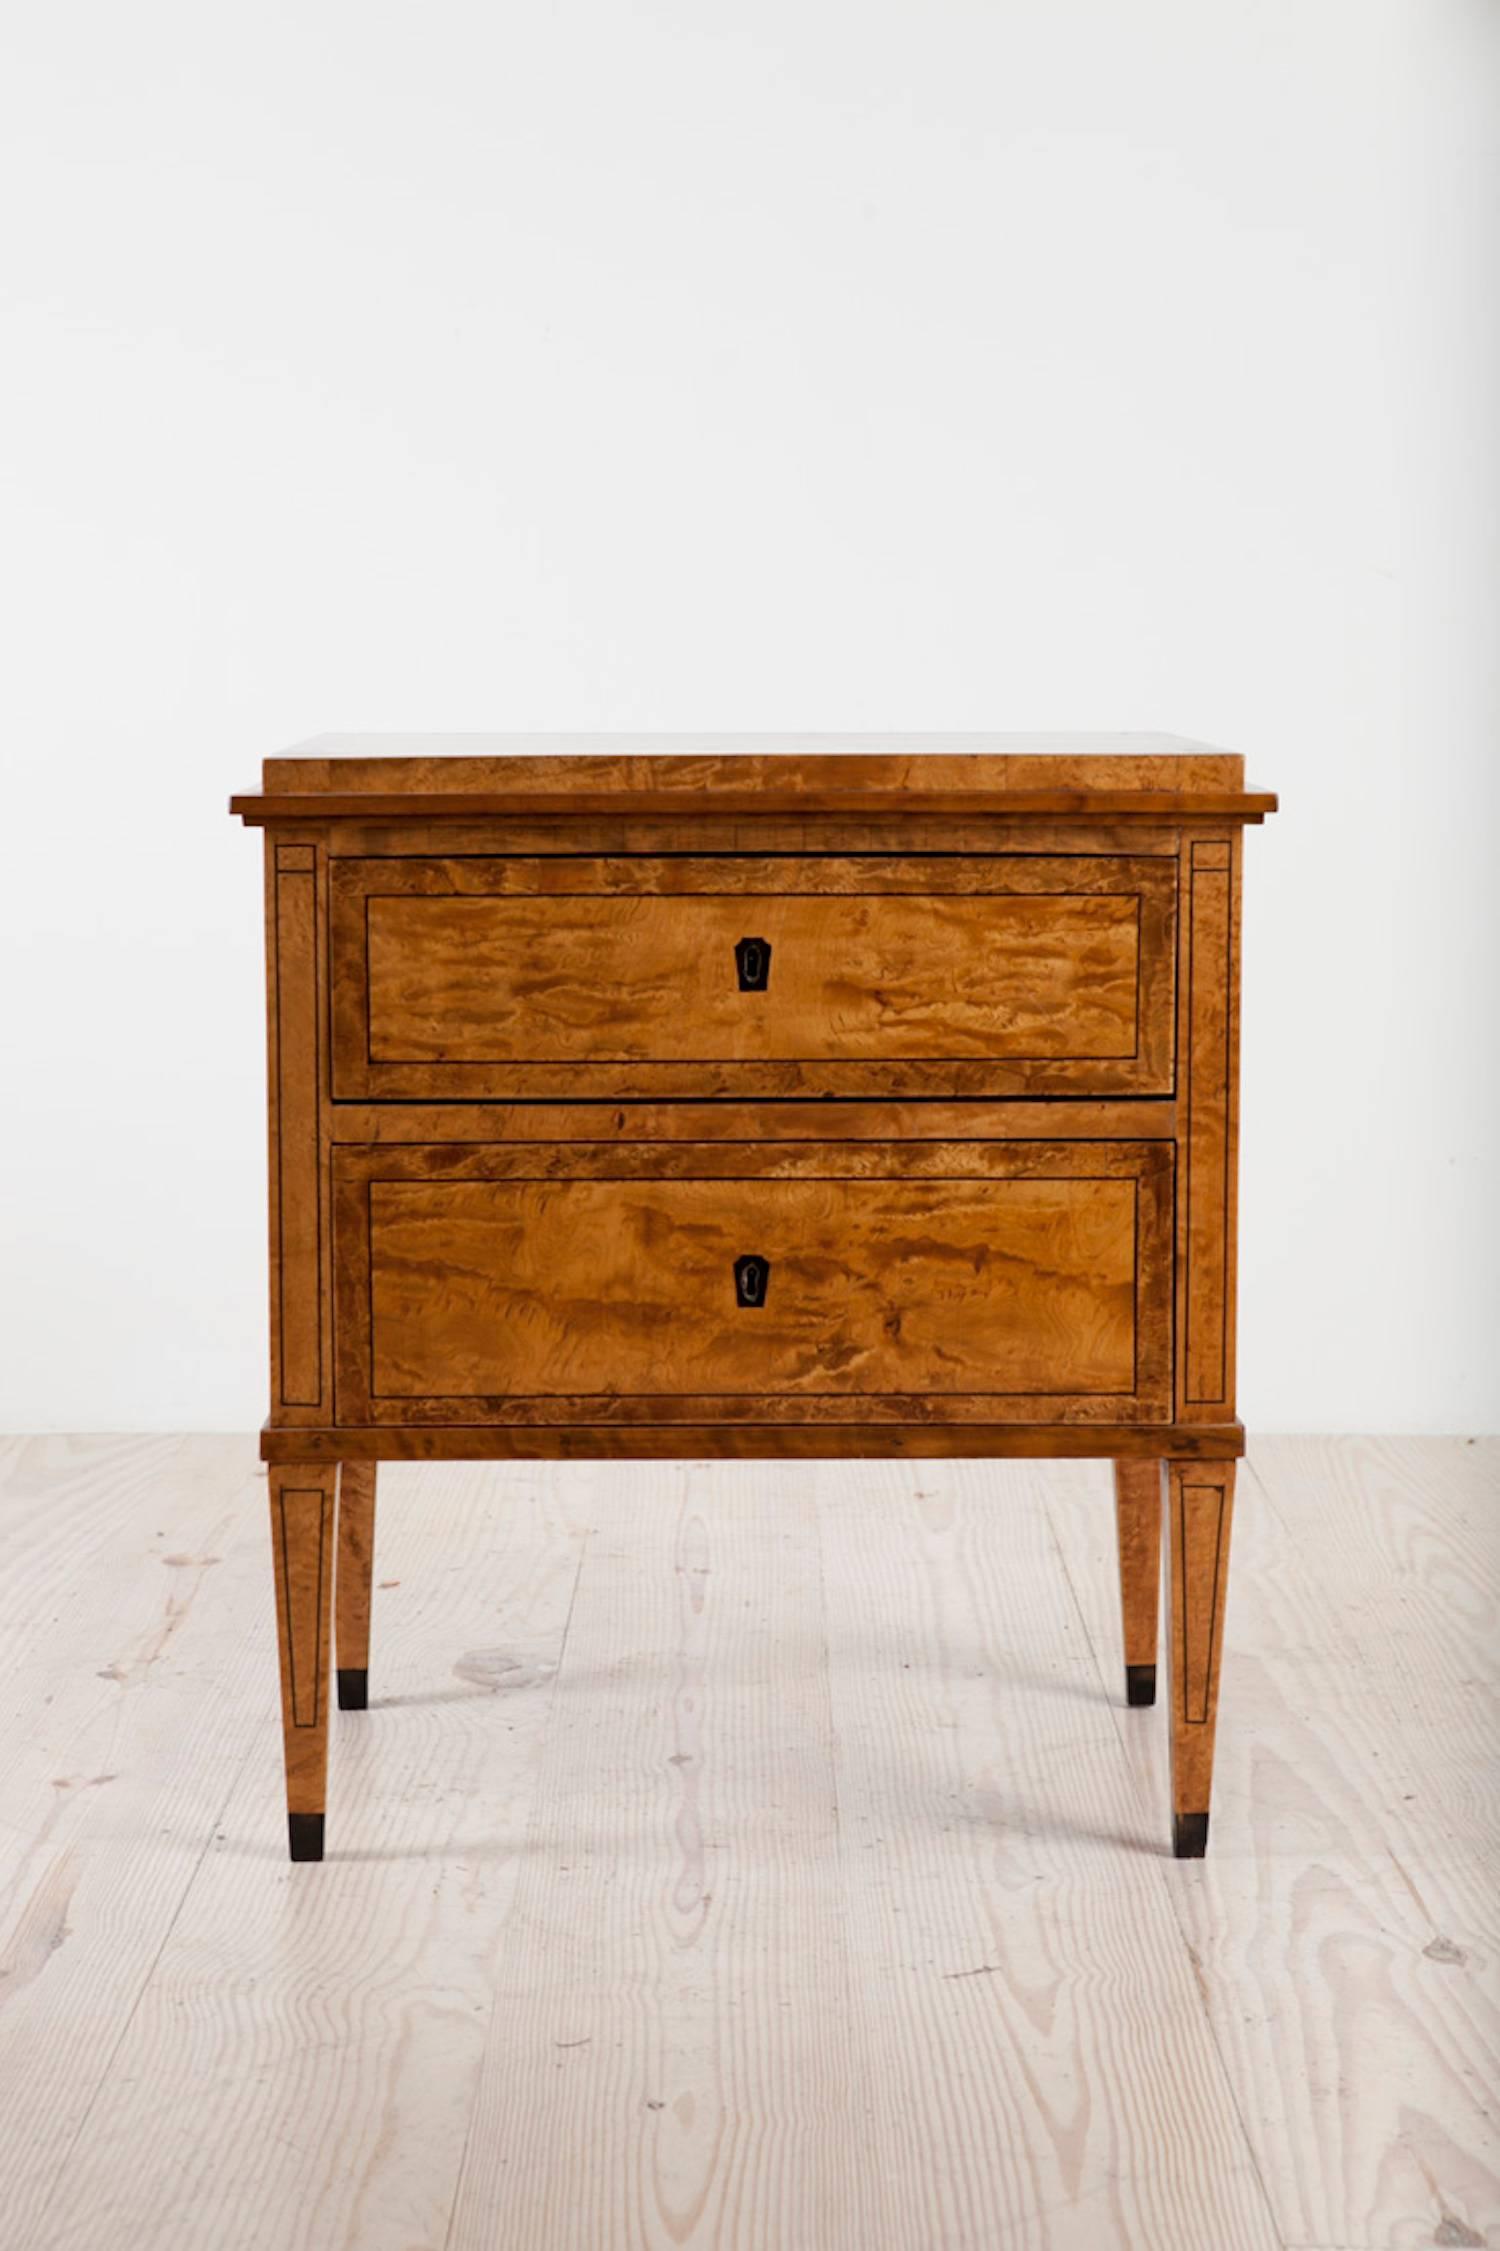 Karl Johan commode with two drawers, birchwood with ebonized inlay, origin: Sweden, circa 1840. A great night table and side table.

The Biedermeier or Karl Johan Period in Sweden dates to circa 1820-1850. Named in Sweden after King Carl XIV